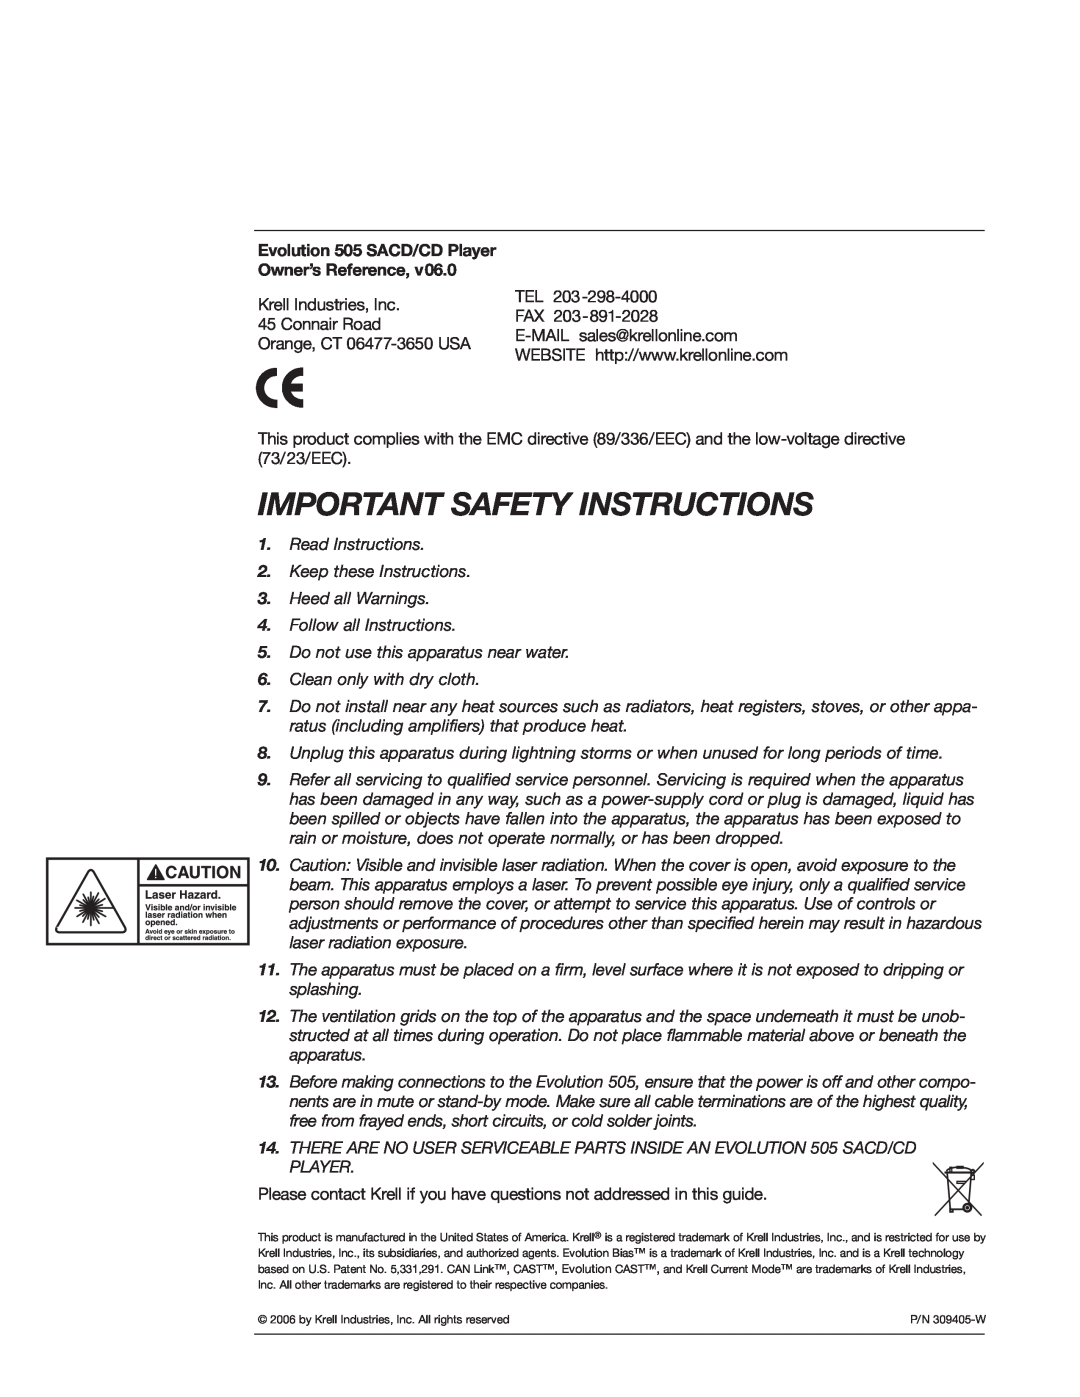 Krell Industries 505 manual Important Safety Instructions, Krell Industries, Inc 45 Connair Road, Orange, CT 06477-3650USA 